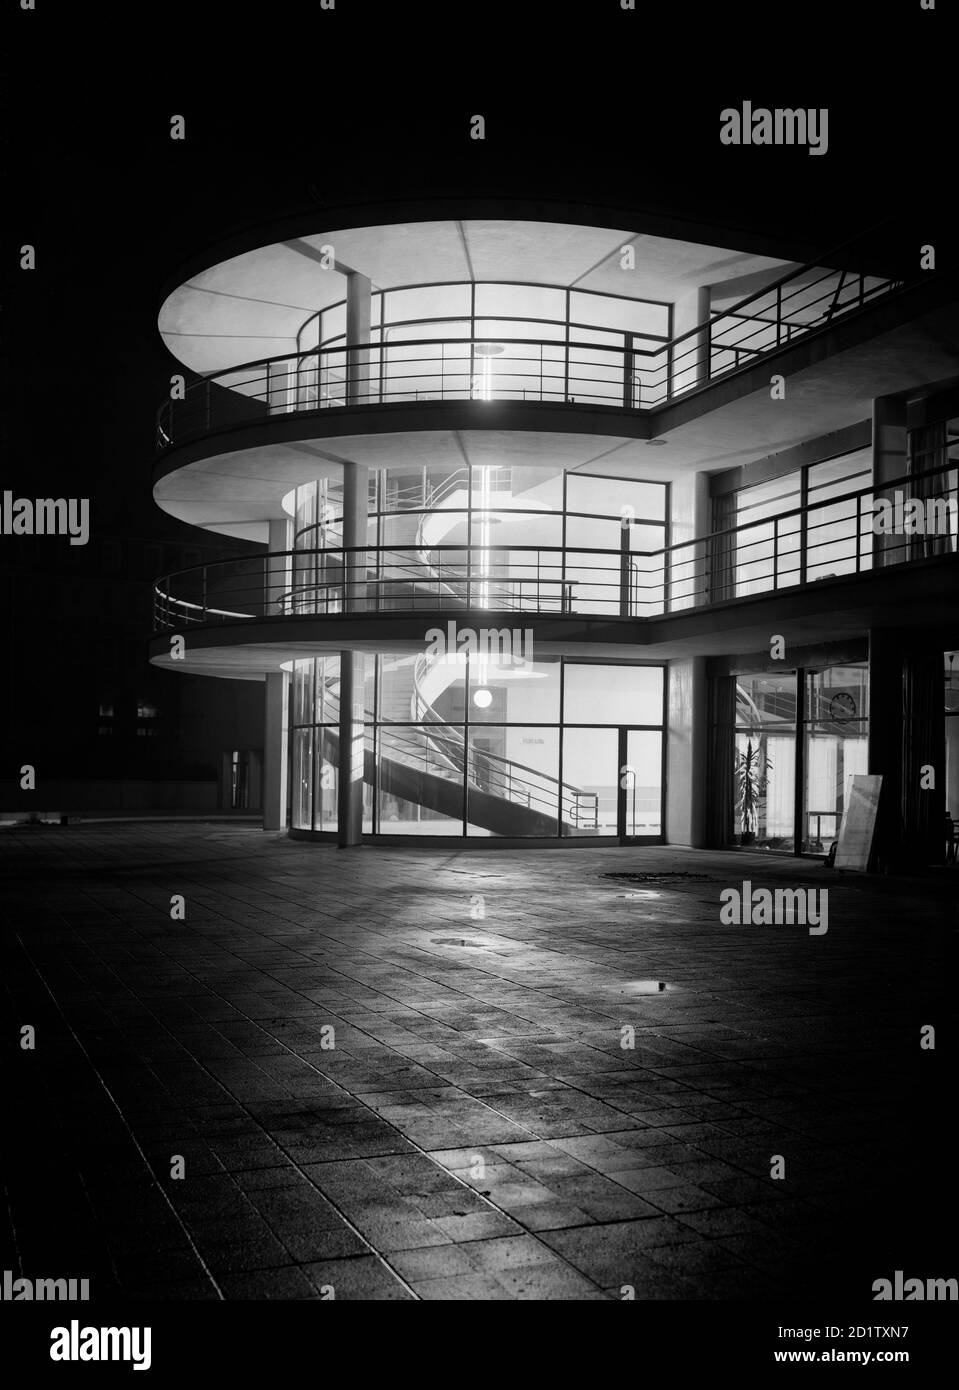 DE LA WARR PAVILION, Bexhill on Sea, East Sussex. The Pavilion at night with interior lighting. Photographed by Herbert Felton in 1935 shortly after completion. Stock Photo